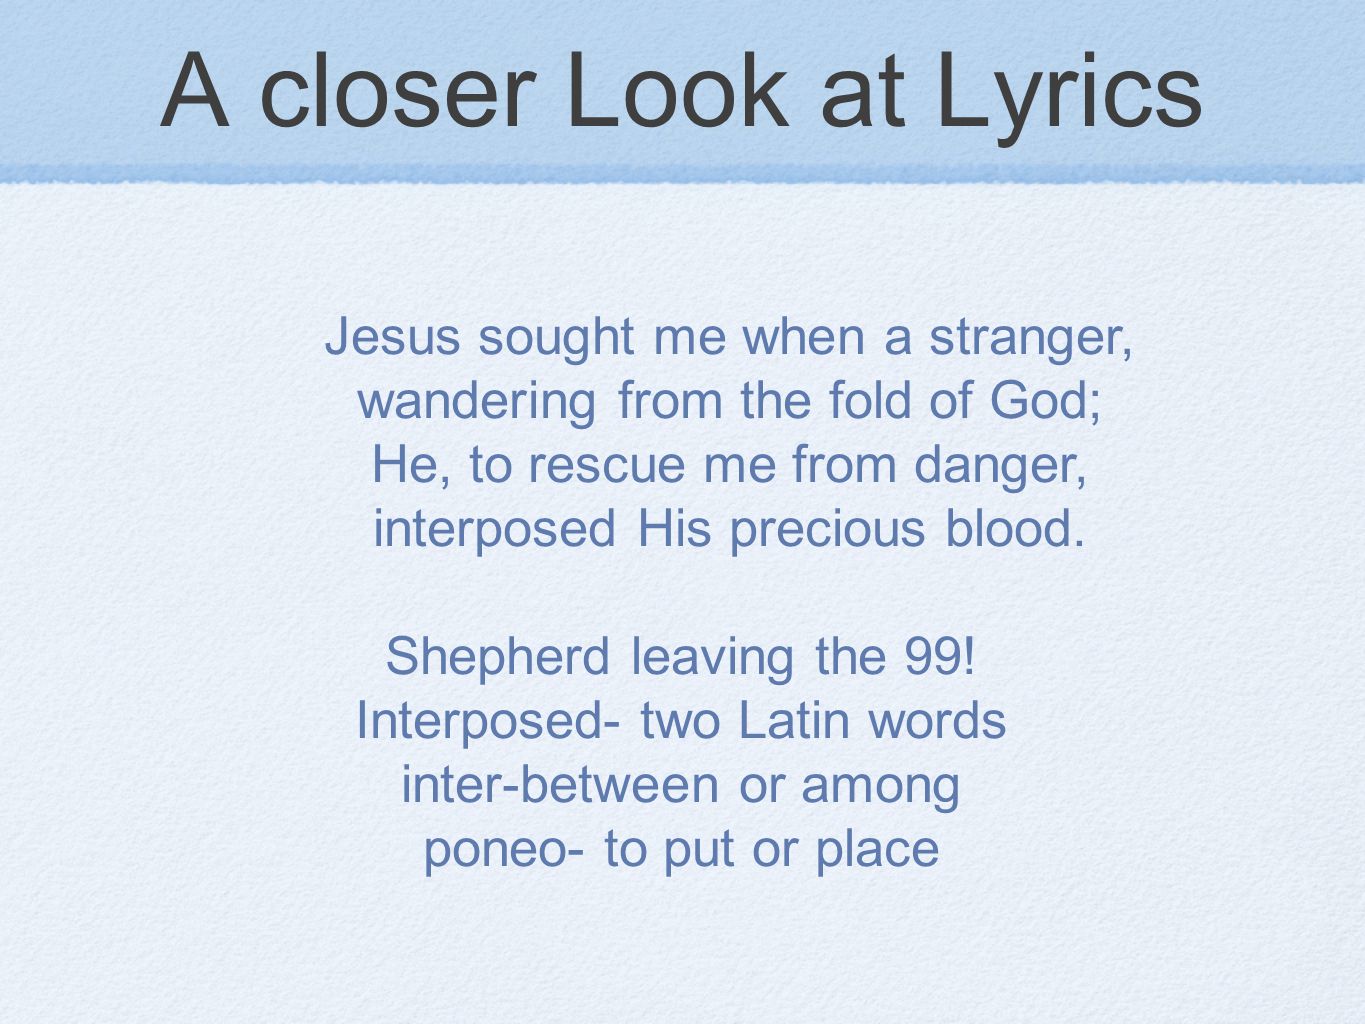 A closer Look at Lyrics Jesus sought me when a stranger, wandering from the fold of God; He, to rescue me from danger, interposed His precious blood.